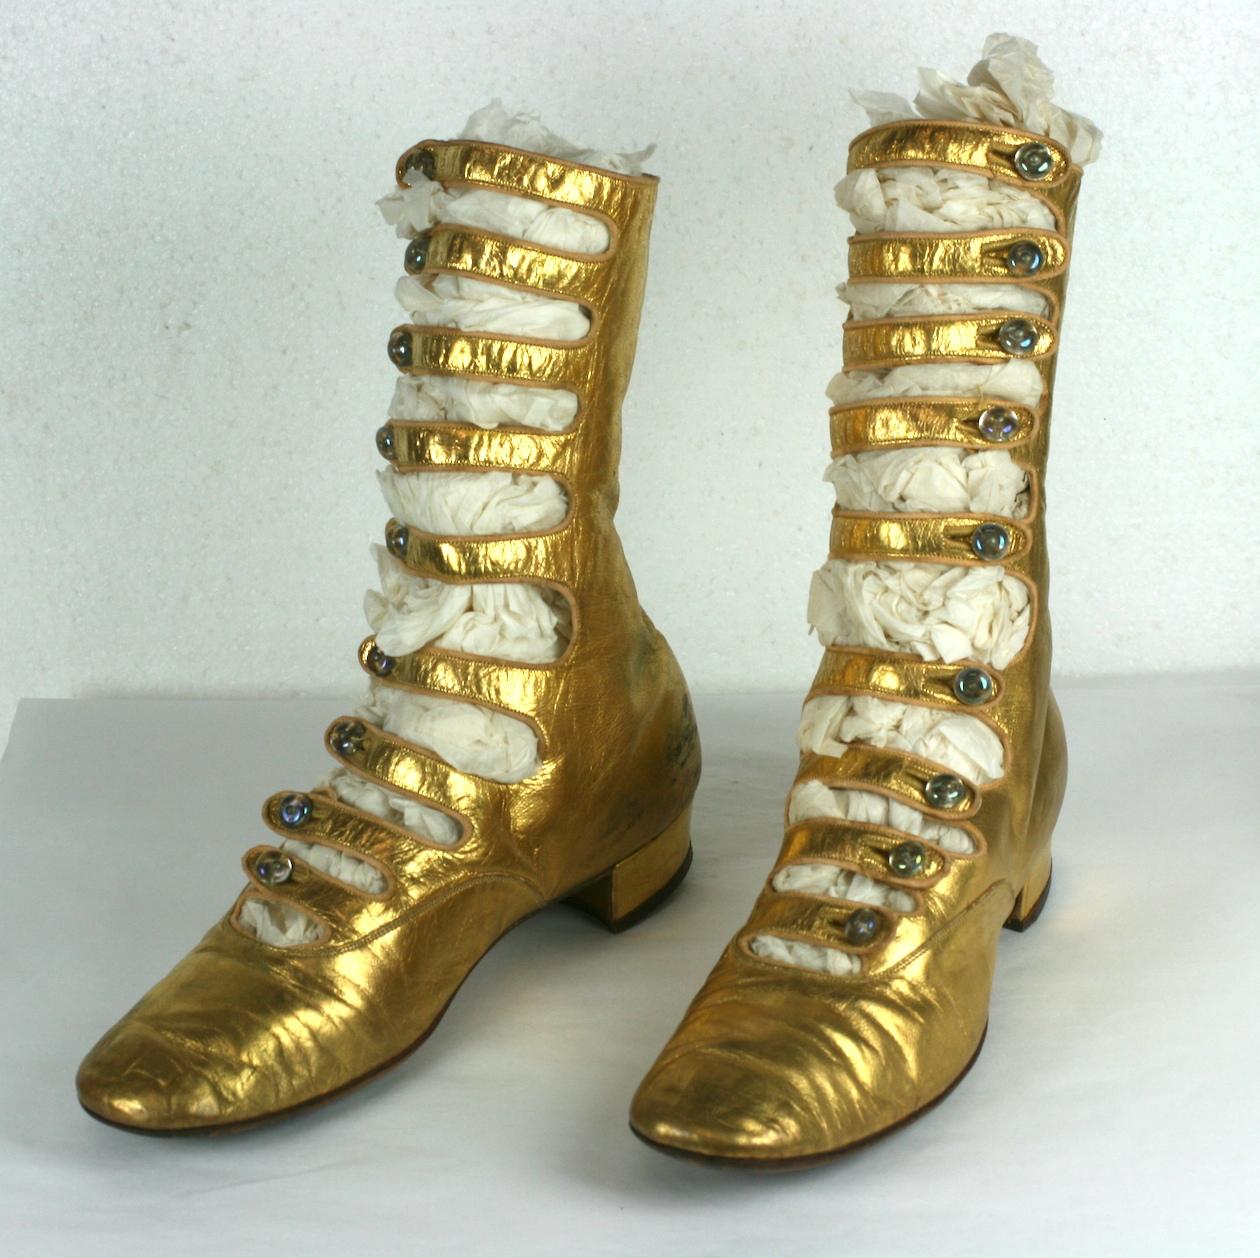 Exceptional and rare French Art Deco Gold Kid Boots. Of fine gold kid leather with high multi strapped instep closed with Tiffany style art glass iridescent shoe buttons. Sole stamped 